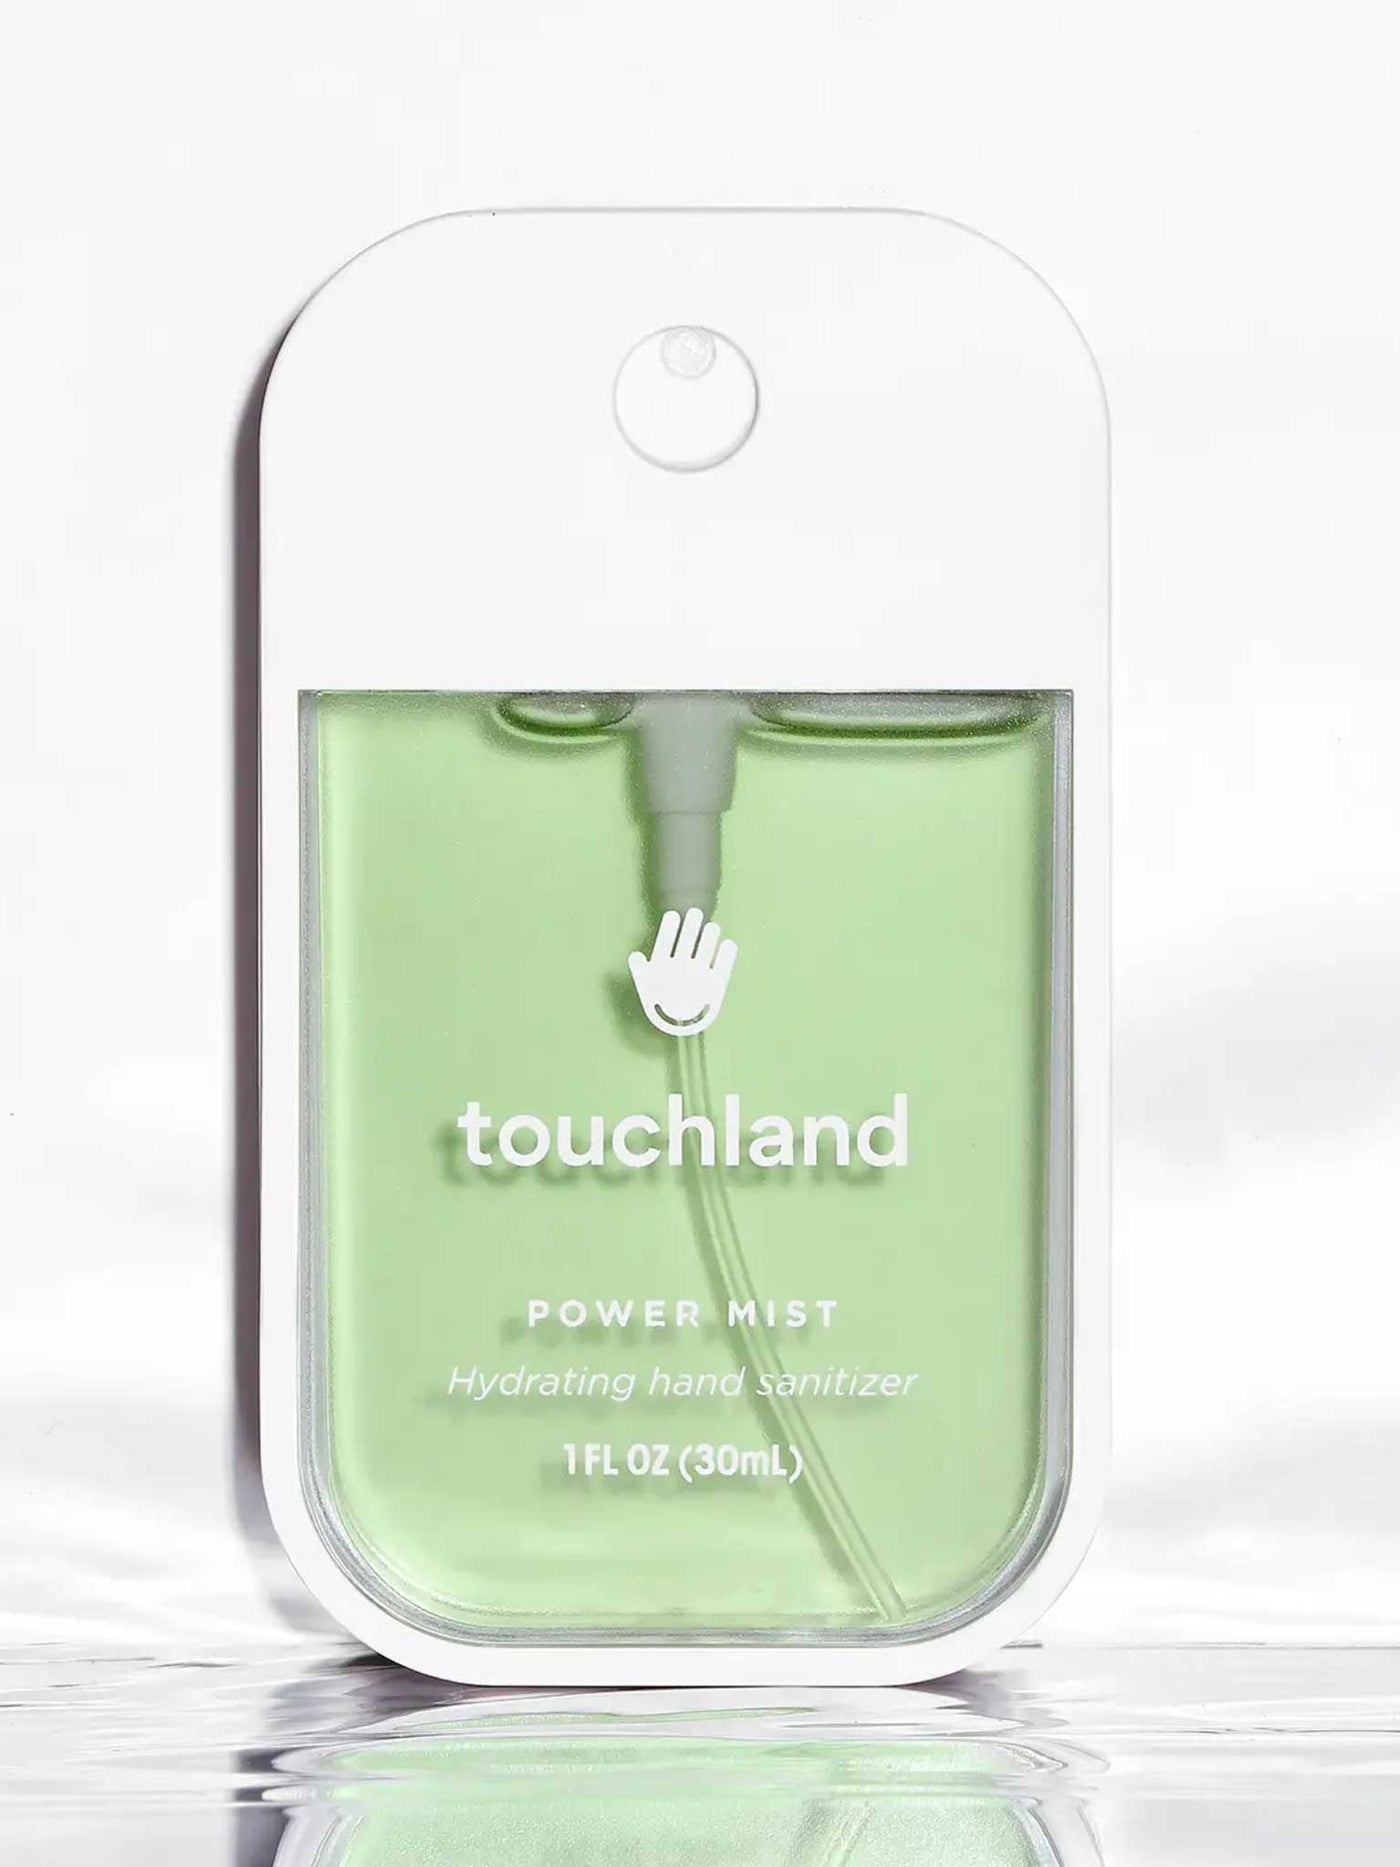 Touchland Power Mist Applelicious Hydrating Hand Sanitizer